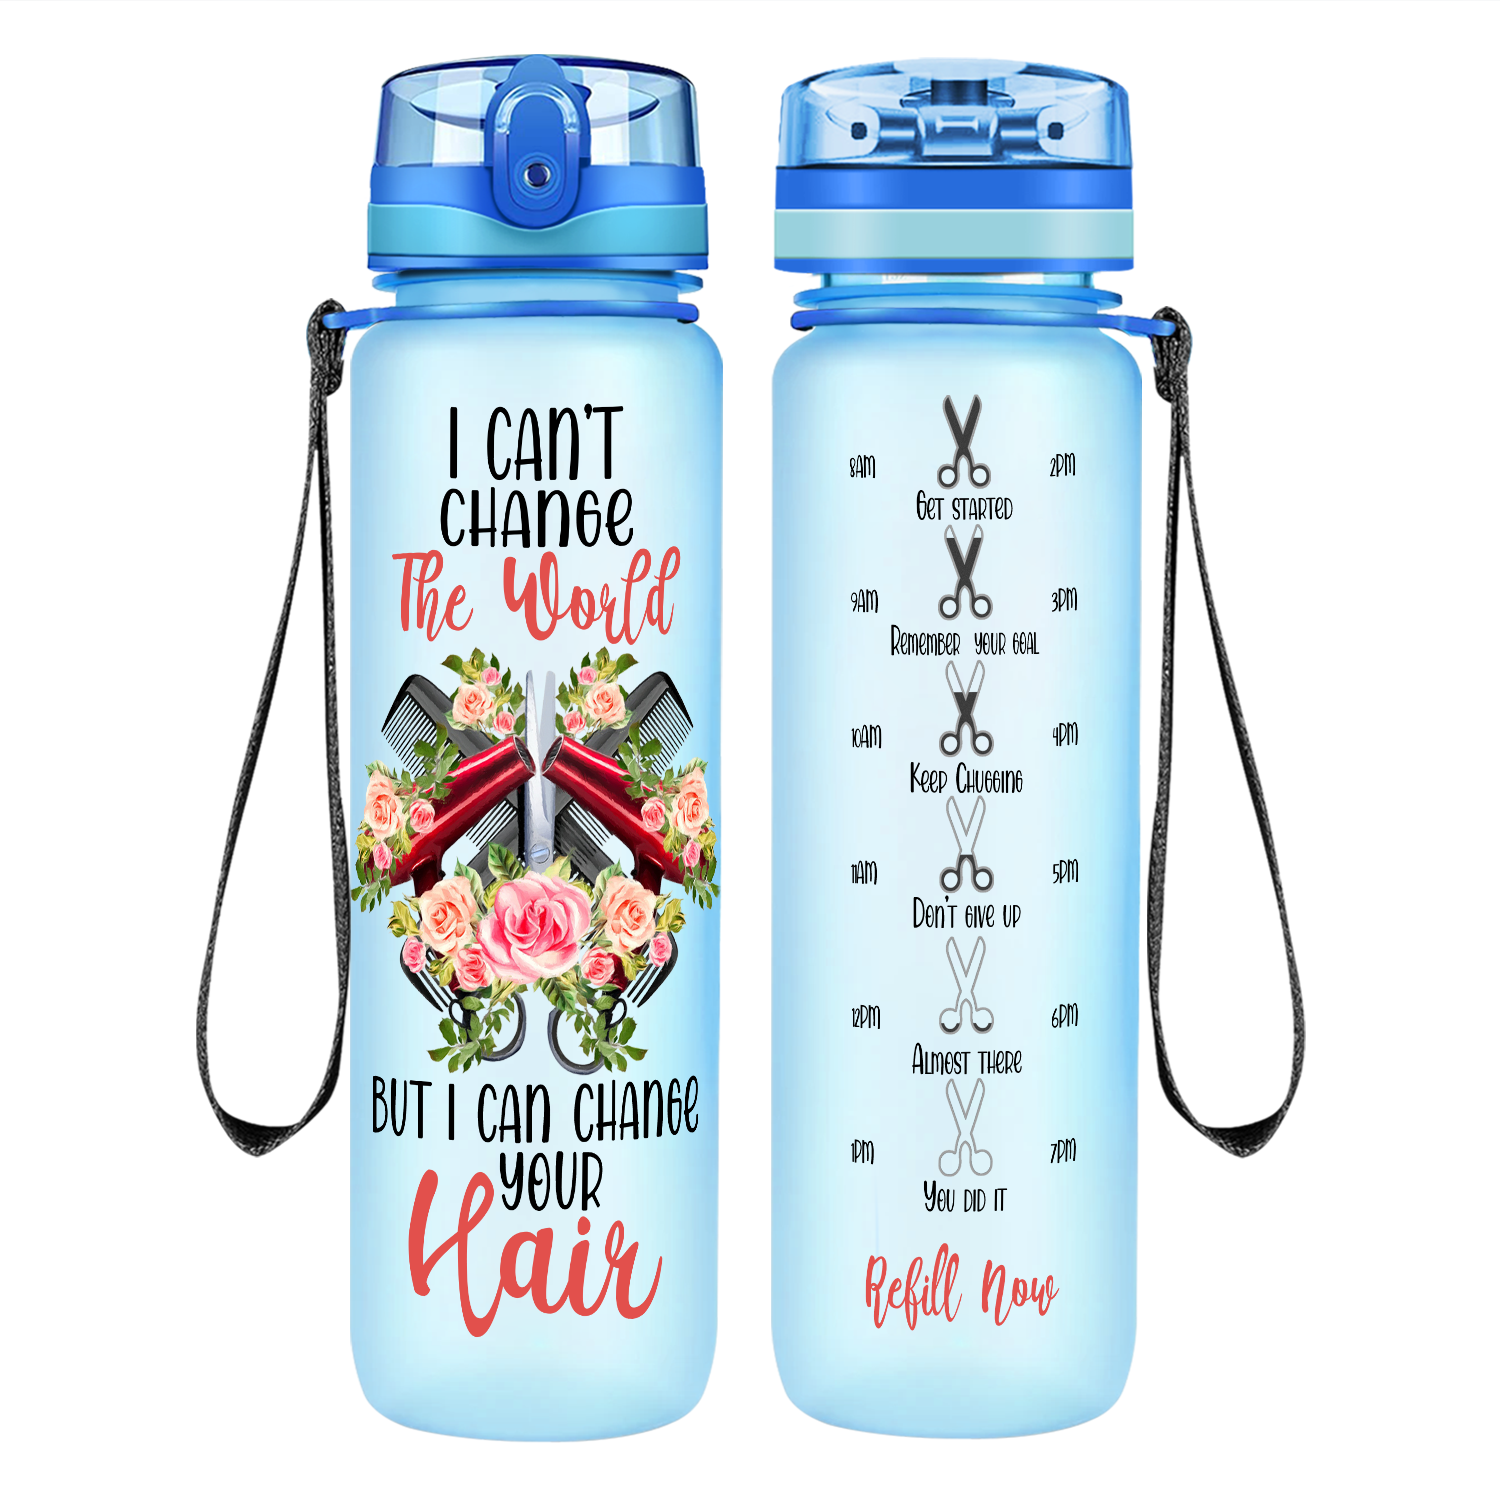 I Can't Change The World But I Can Change Your Hair on 32 oz Motivational Tracking Water Bottle